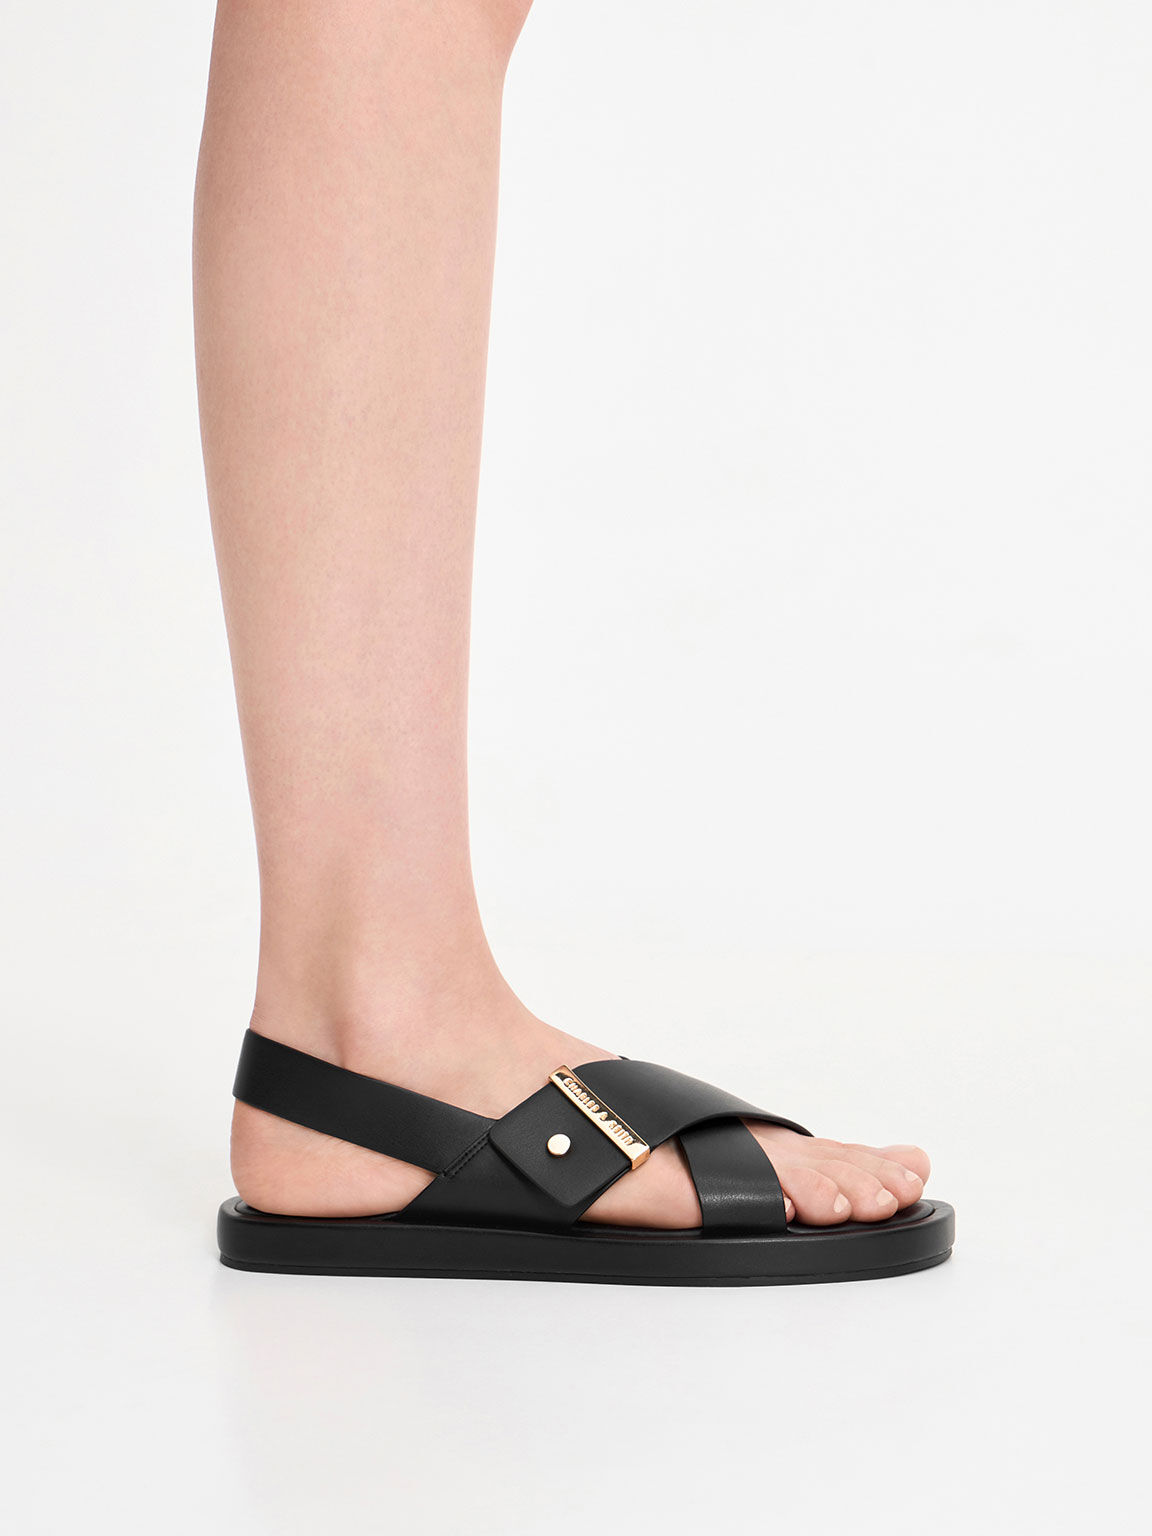 Black Crossover Back Strap Sandals - CHARLES & KEITH US